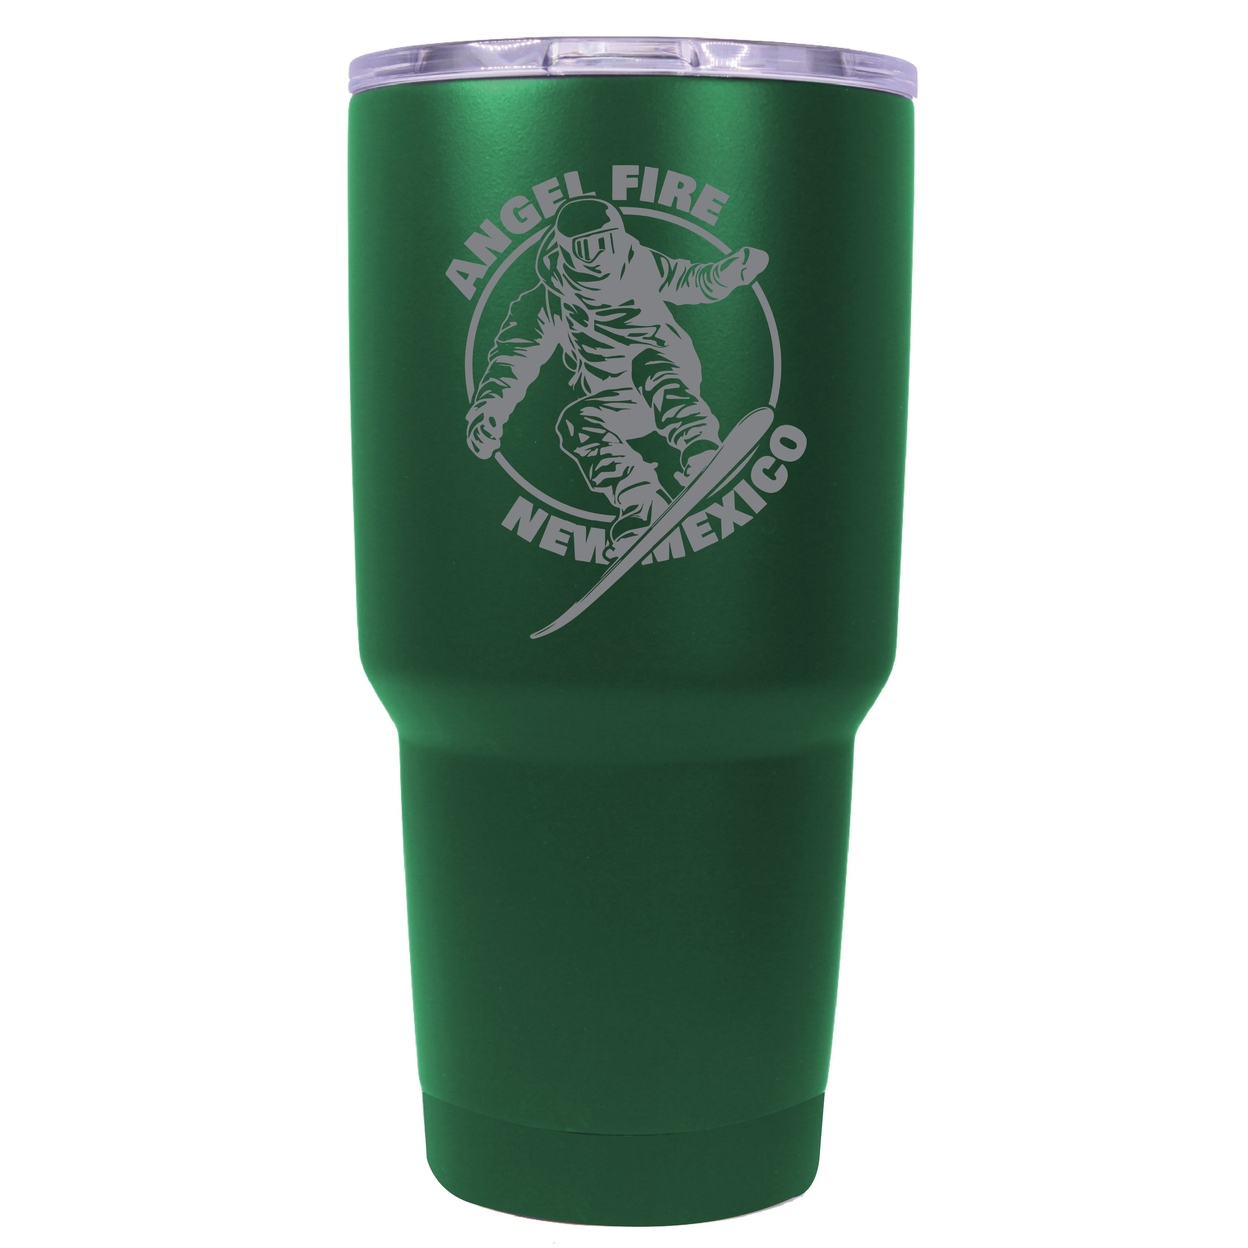 Angel Fire New Mexico Souvenir 24 Oz Engraved Insulated Stainless Steel Tumbler - Green,,2-Pack